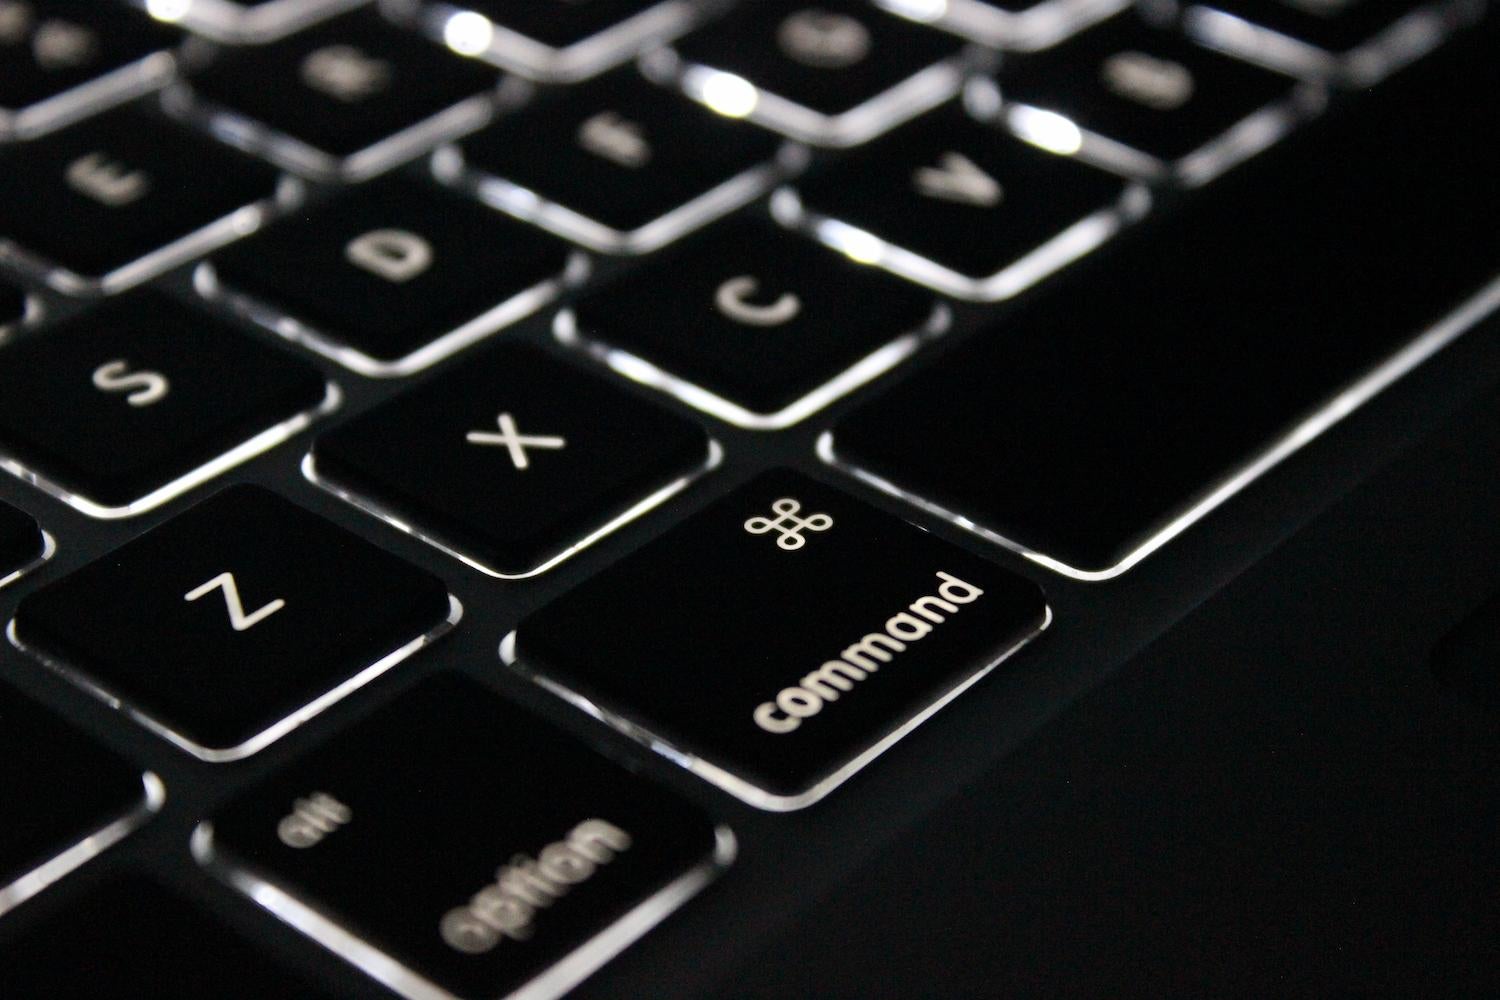 keyboard with command key